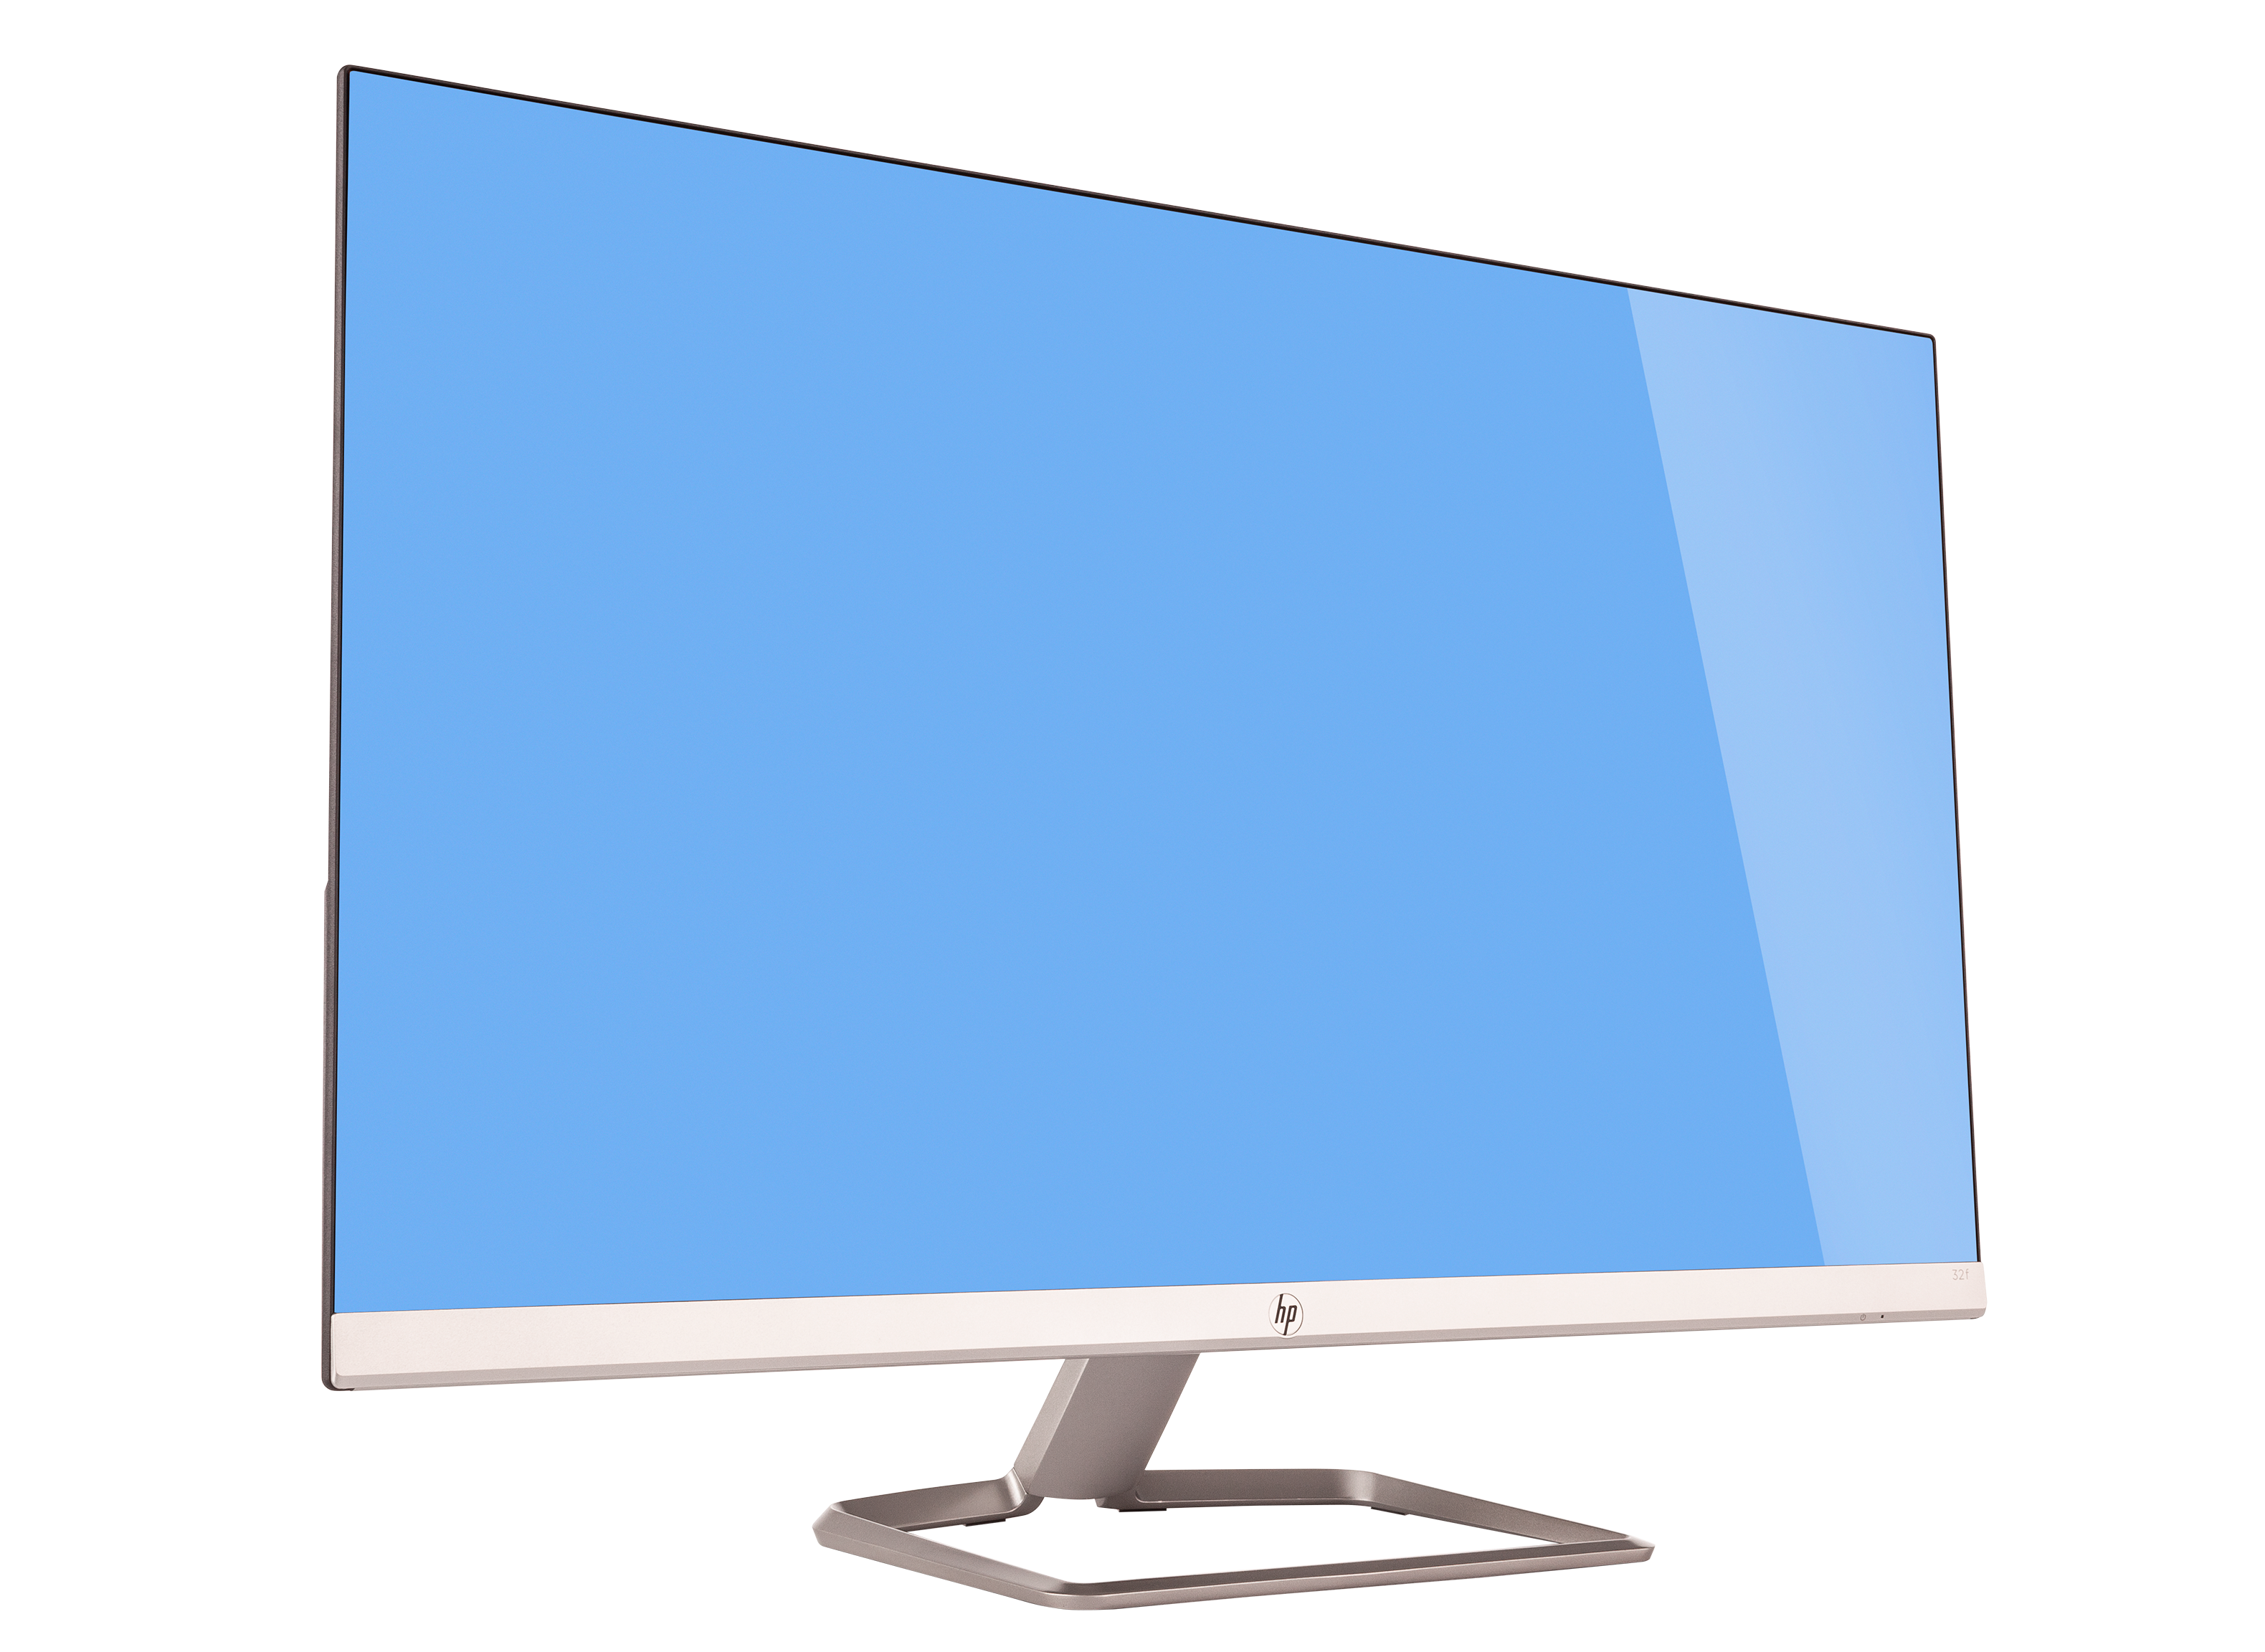 https://crdms.images.consumerreports.org/prod/products/cr/models/403278-27-to-32-inch-computer-monitors-hp-32f-10018822.png